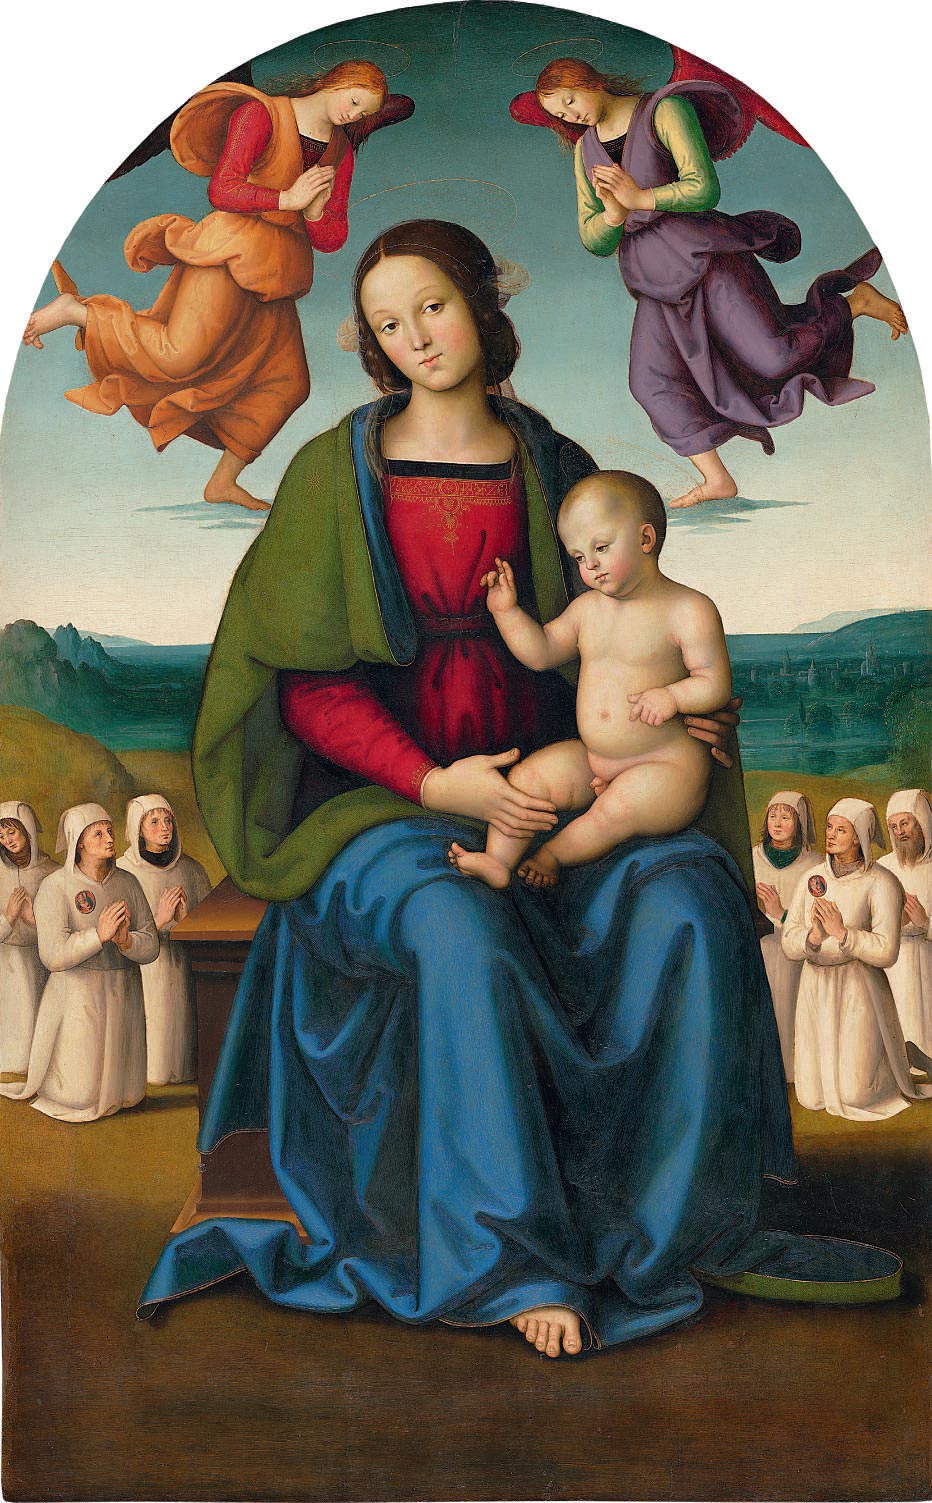 Perugino, Madonna of the Confraternity of Consolation (1496-1498; tempera and oil on panel, 146 x 104 cm; Perugia, National Gallery of Umbria)